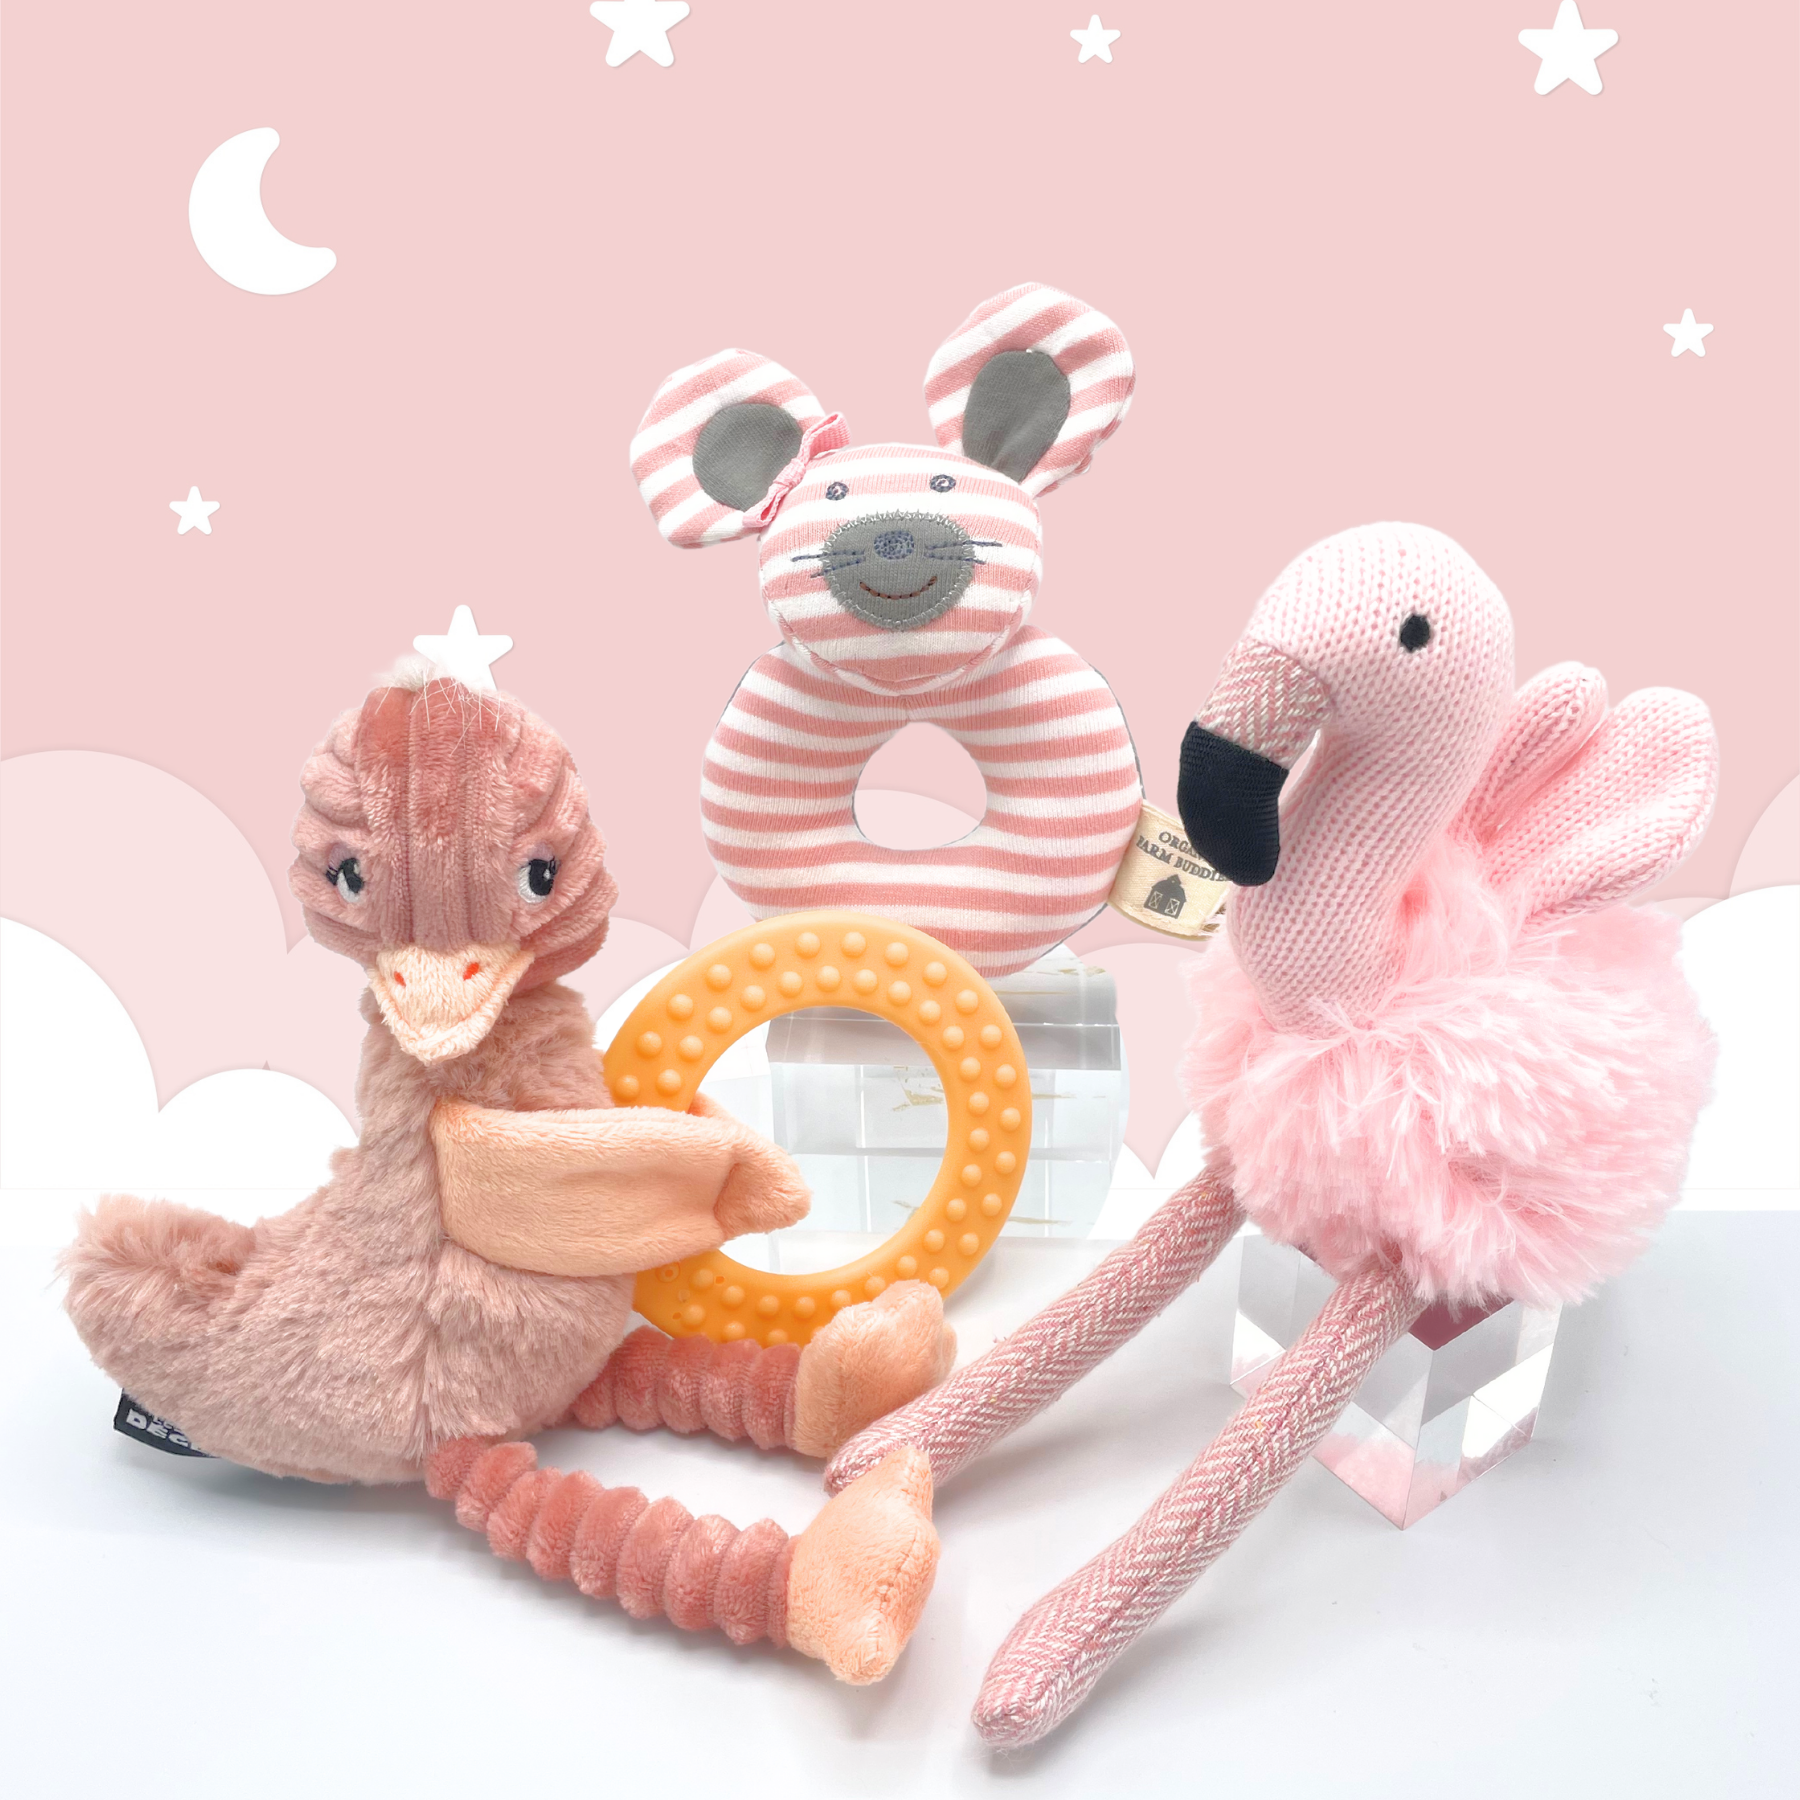 Joyful Jellybean Blush Pink themed toys including a baby toy flamingo rattle, baby toy mouse maraca and baby toy ostrich teether